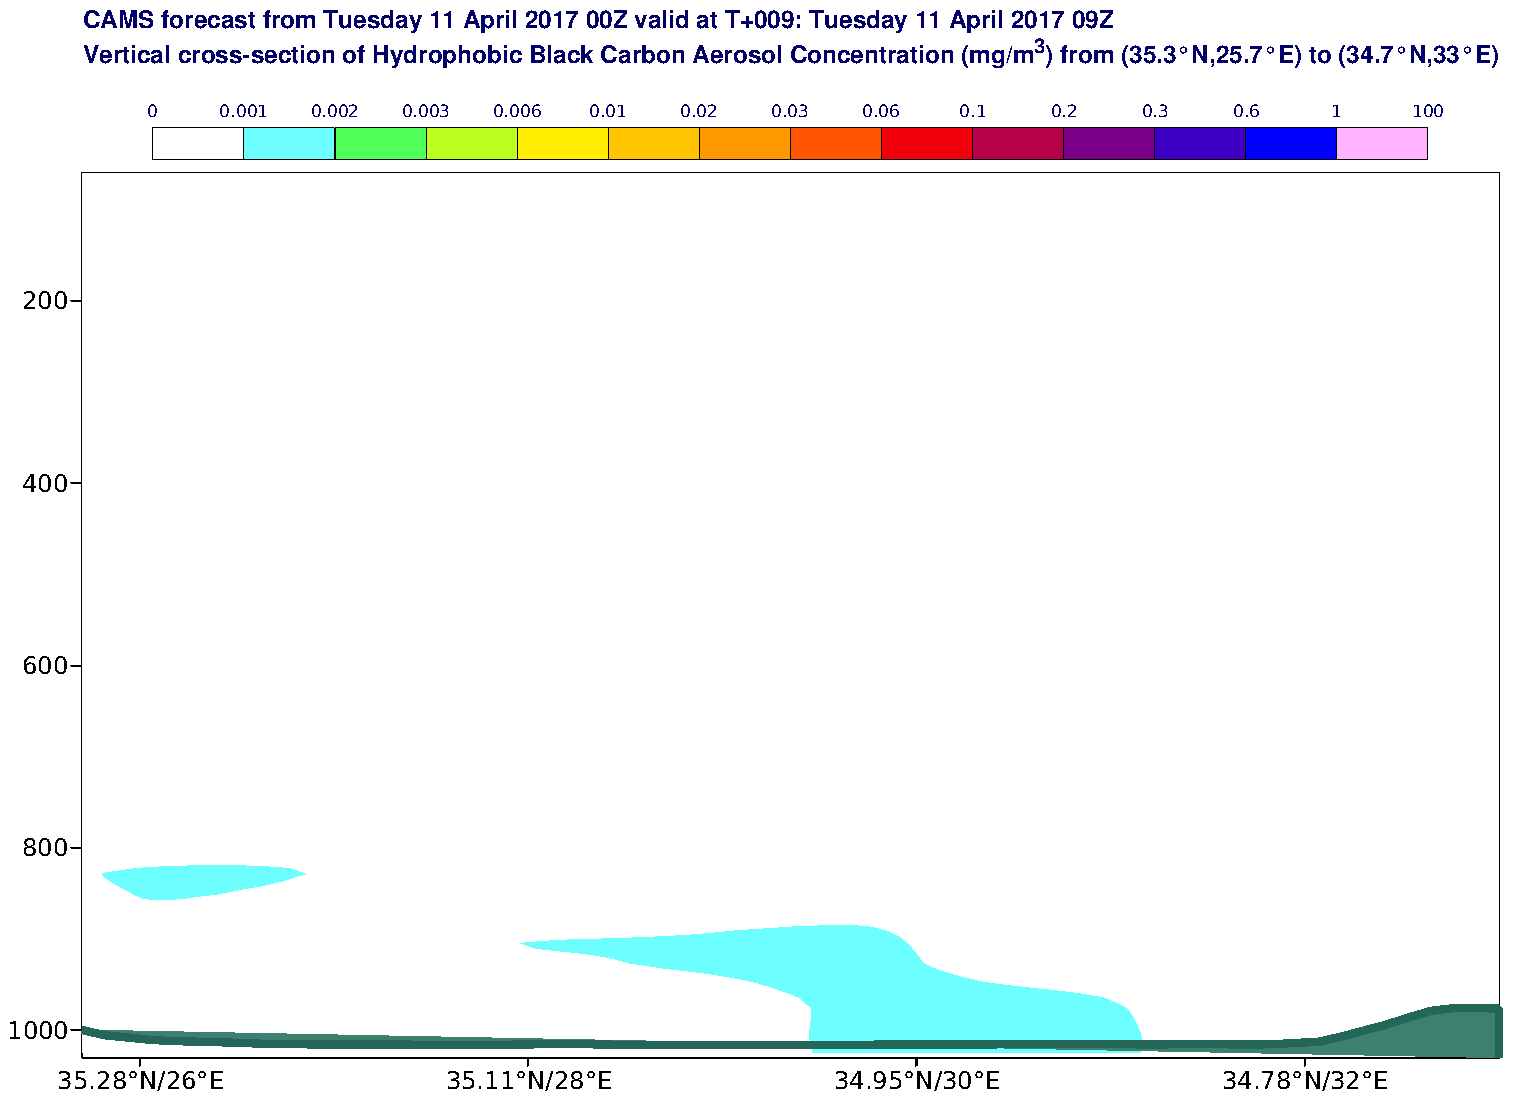 Vertical cross-section of Hydrophobic Black Carbon Aerosol Concentration (mg/m3) valid at T9 - 2017-04-11 09:00